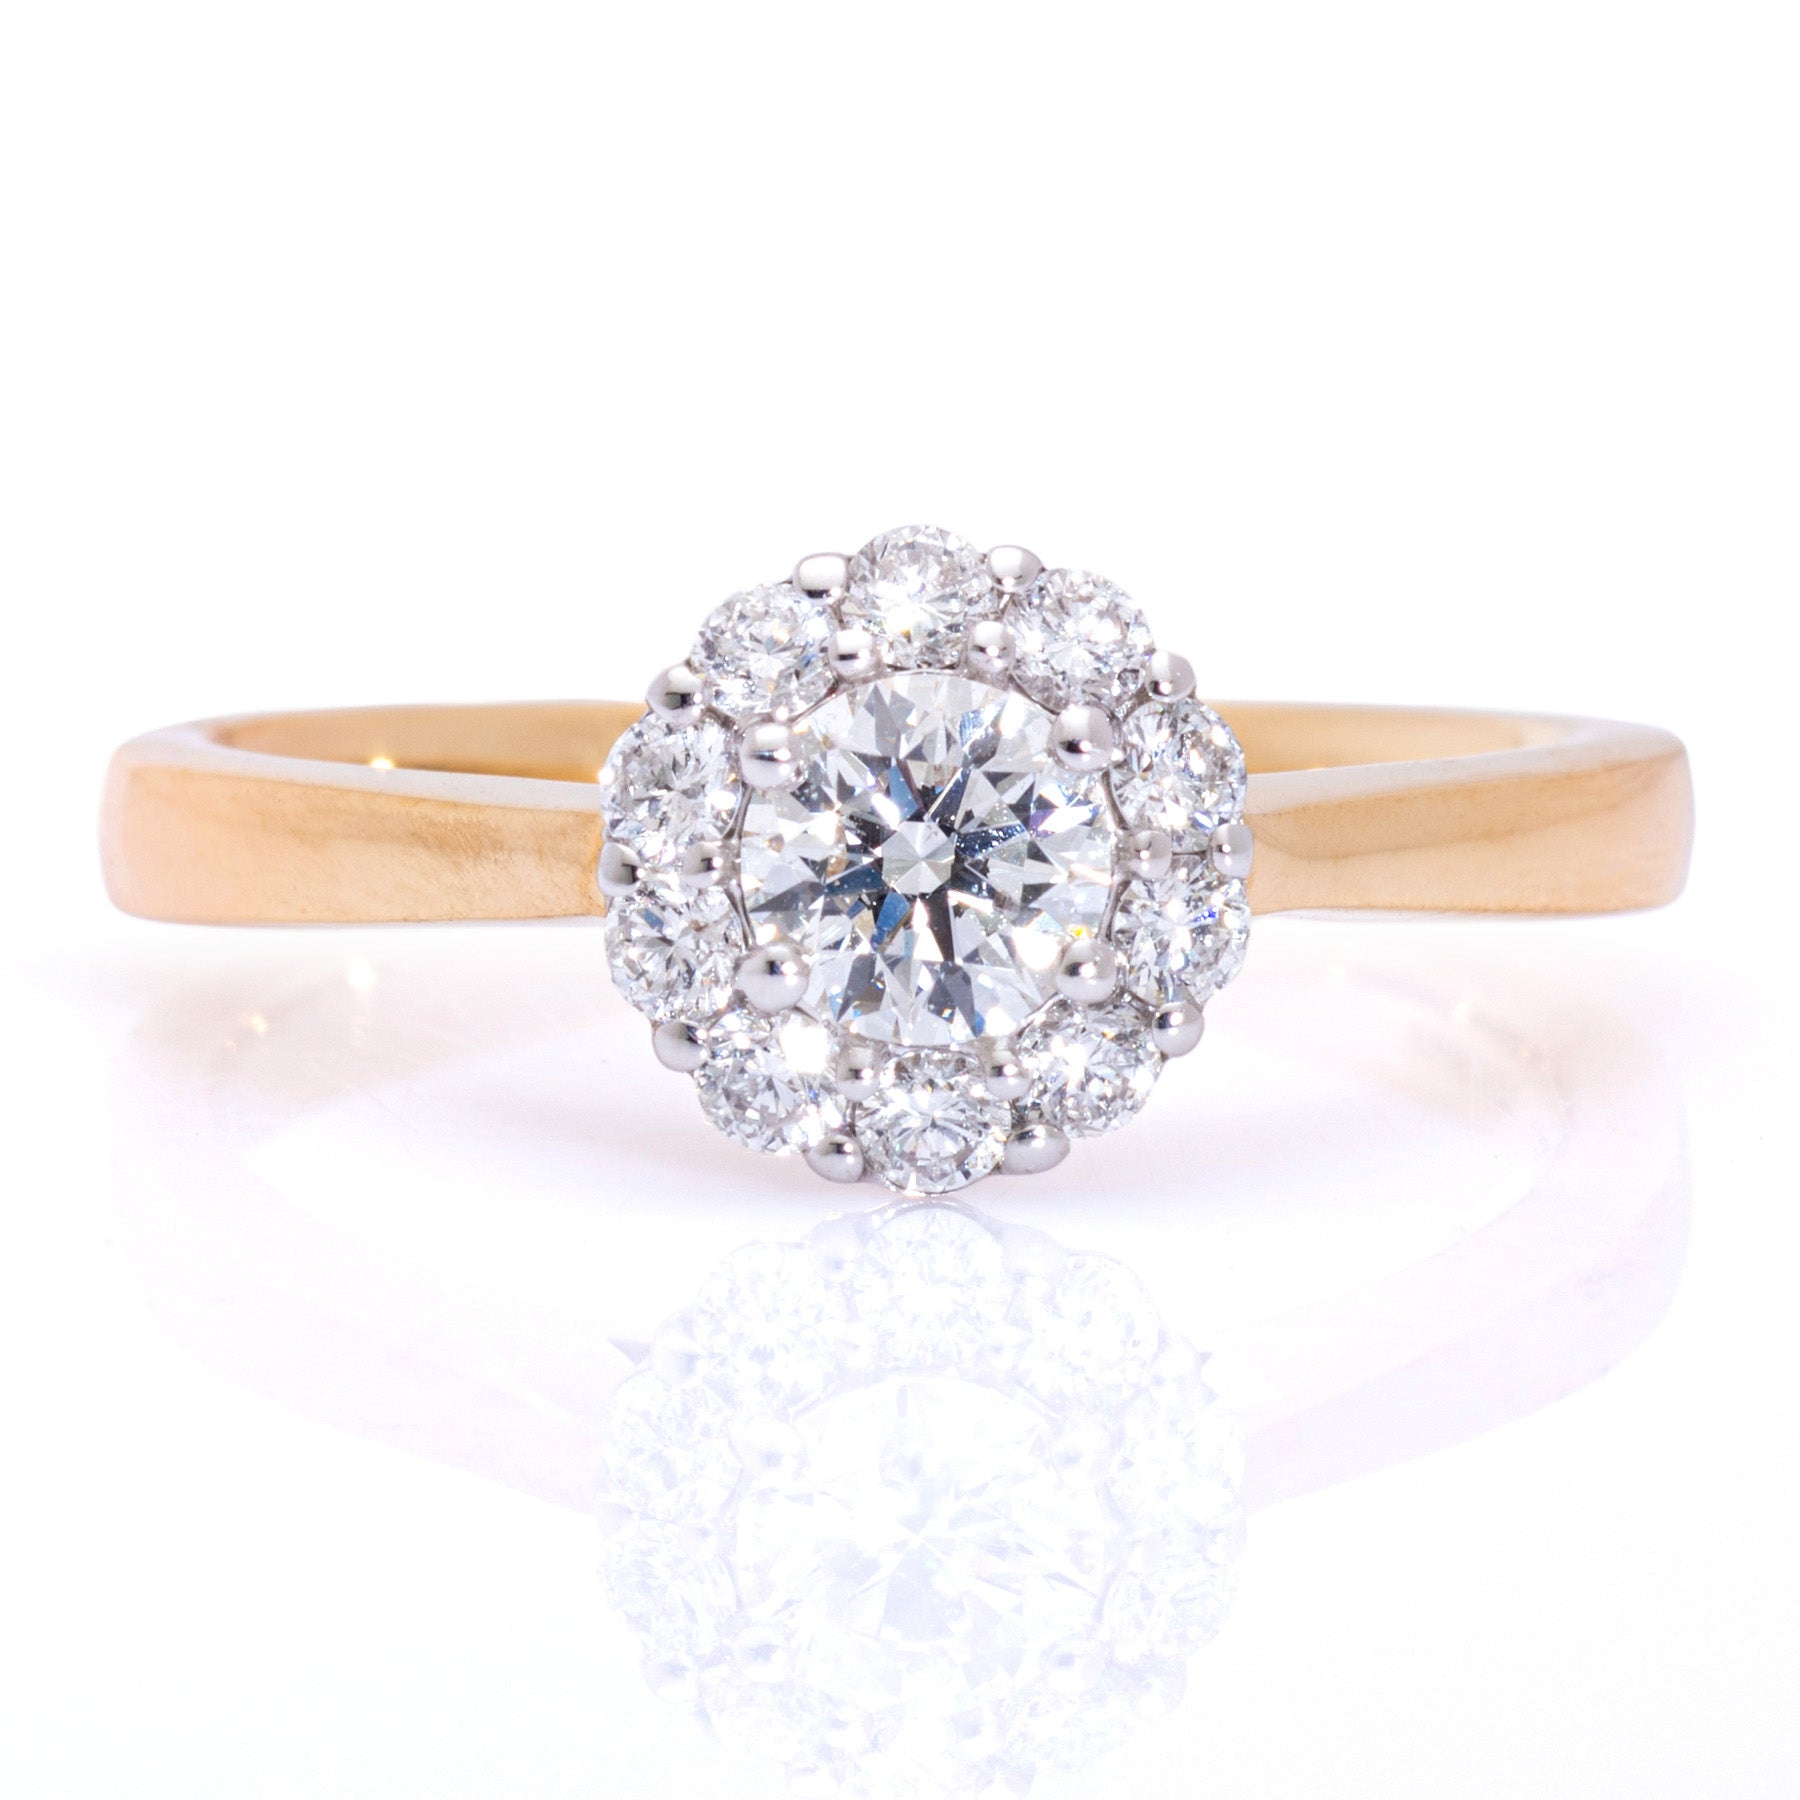 Round brilliant diamond cluster engagement ring yellow gold Harrogate jewellers Fogal and barnes 